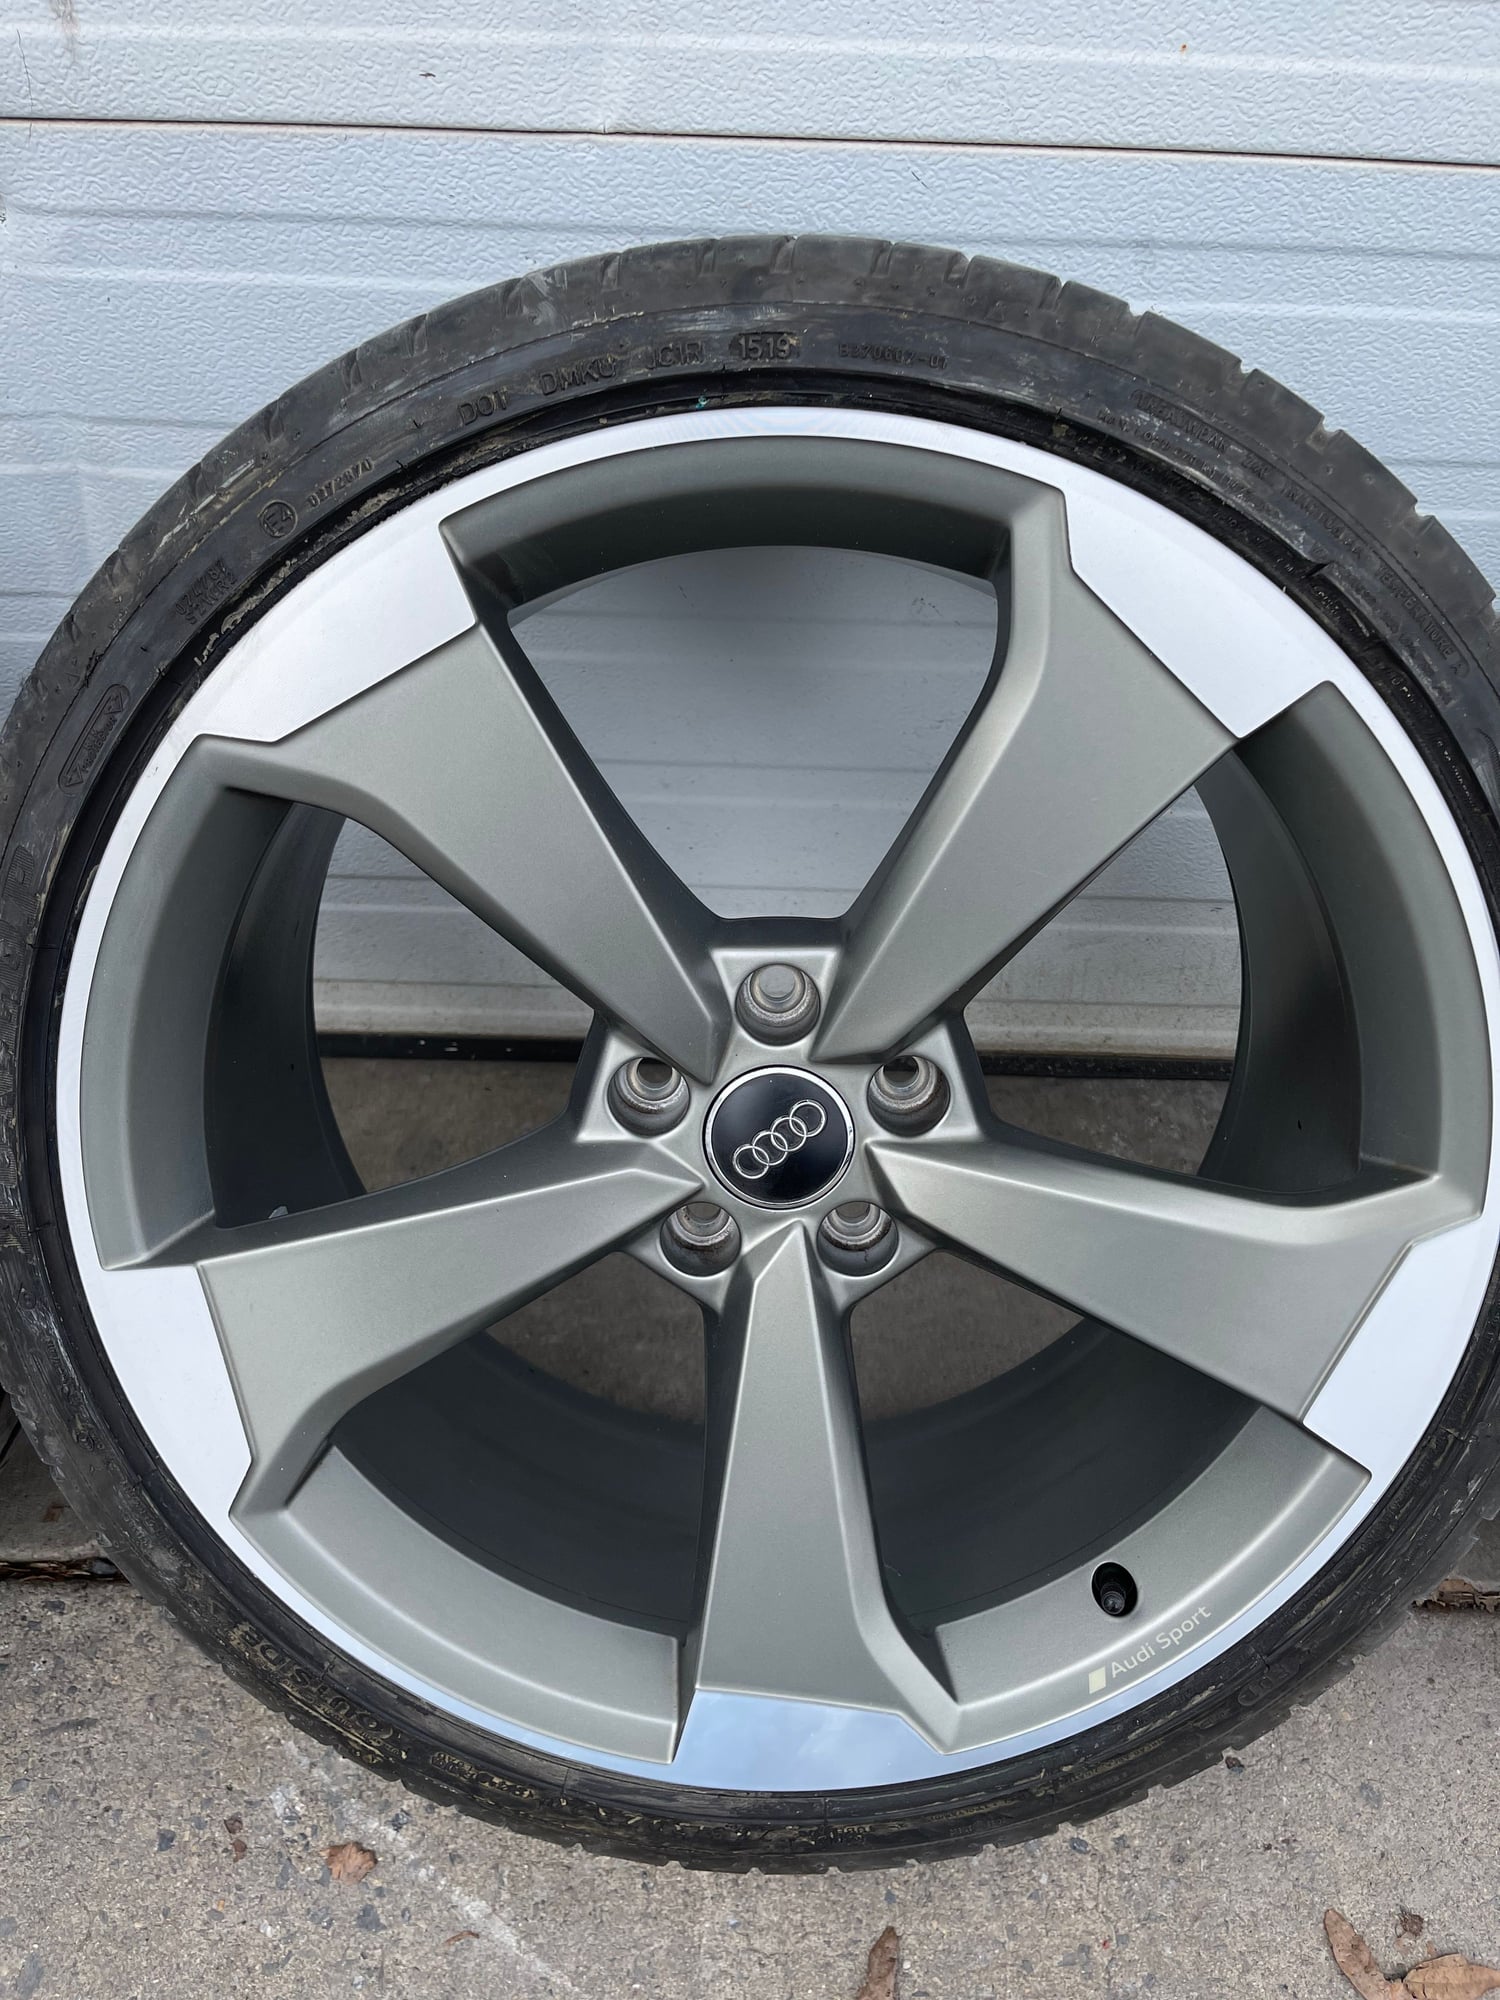 Wheels and Tires/Axles - OEM 20” 5 arm rotor wheels 2019 MINT - Used - 0  All Models - Allentown, PA 18104, United States